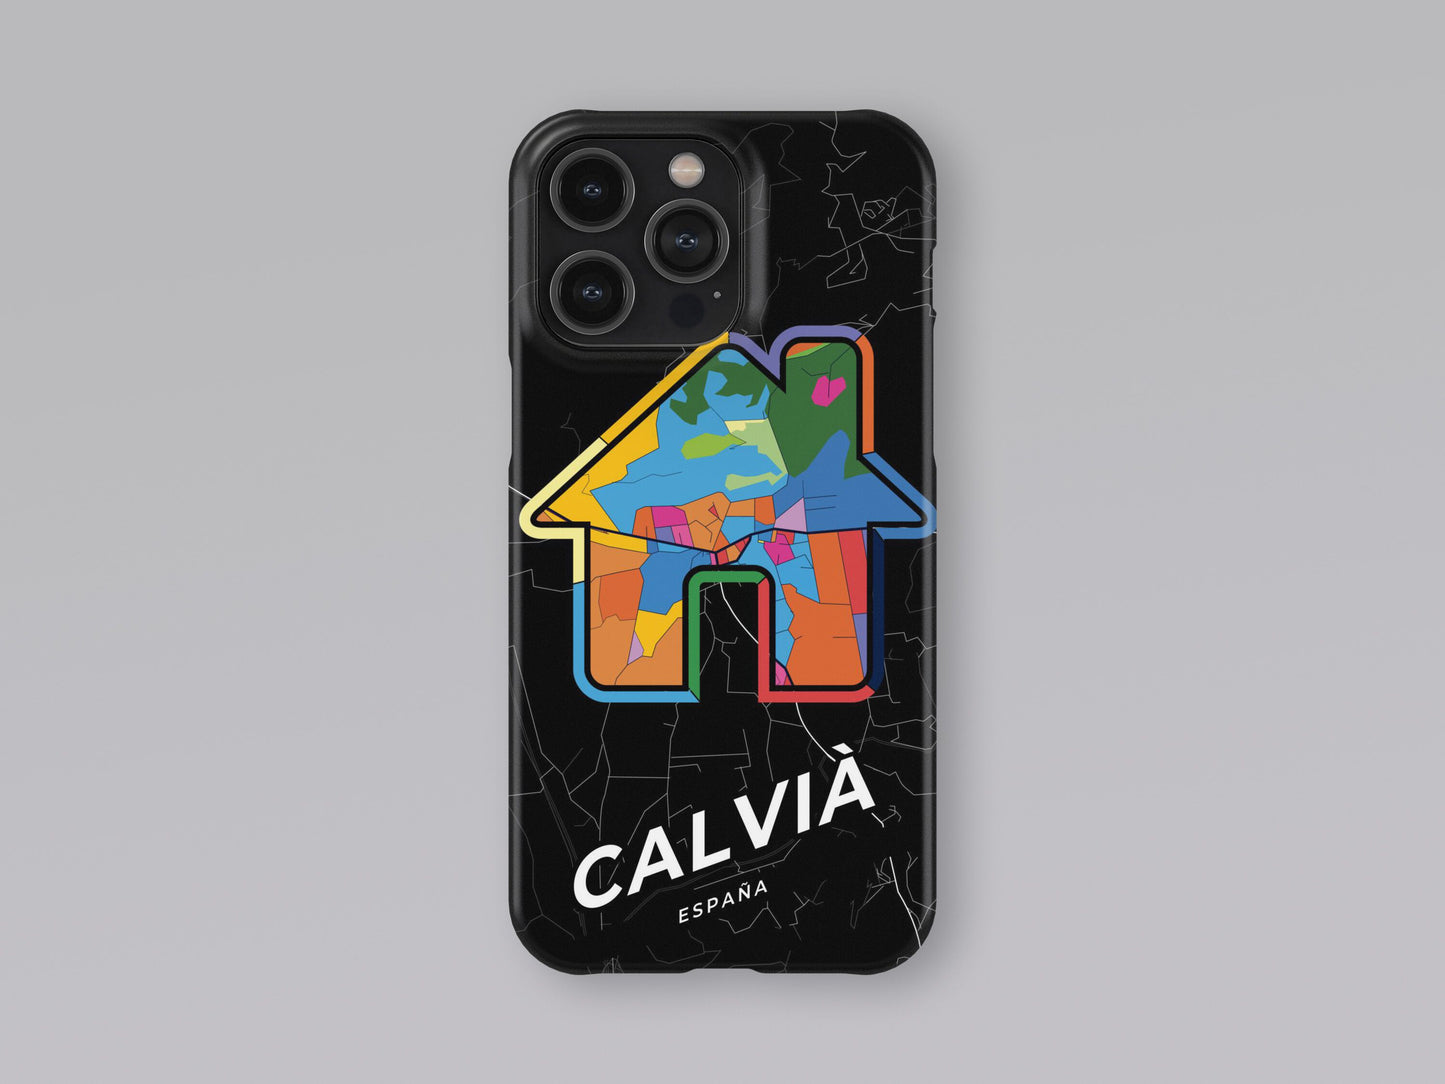 Calvià Spain slim phone case with colorful icon. Birthday, wedding or housewarming gift. Couple match cases. 3